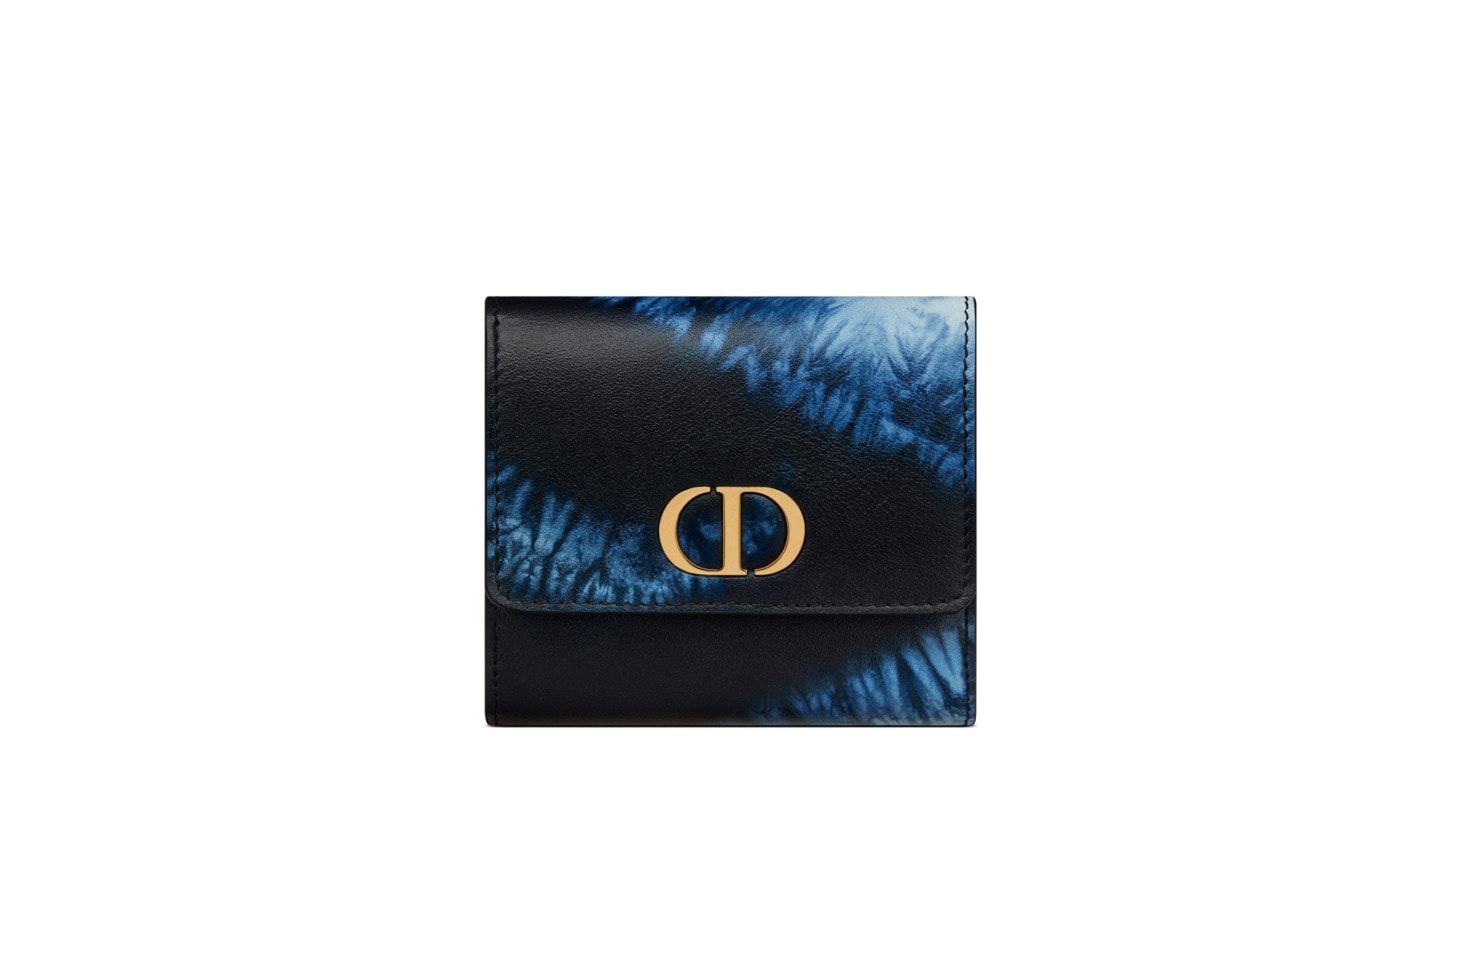 Dior Tie-Dye Accessories Collection Saddle Bag Book Tote Luxury Sneaker Wallet Phone Case 